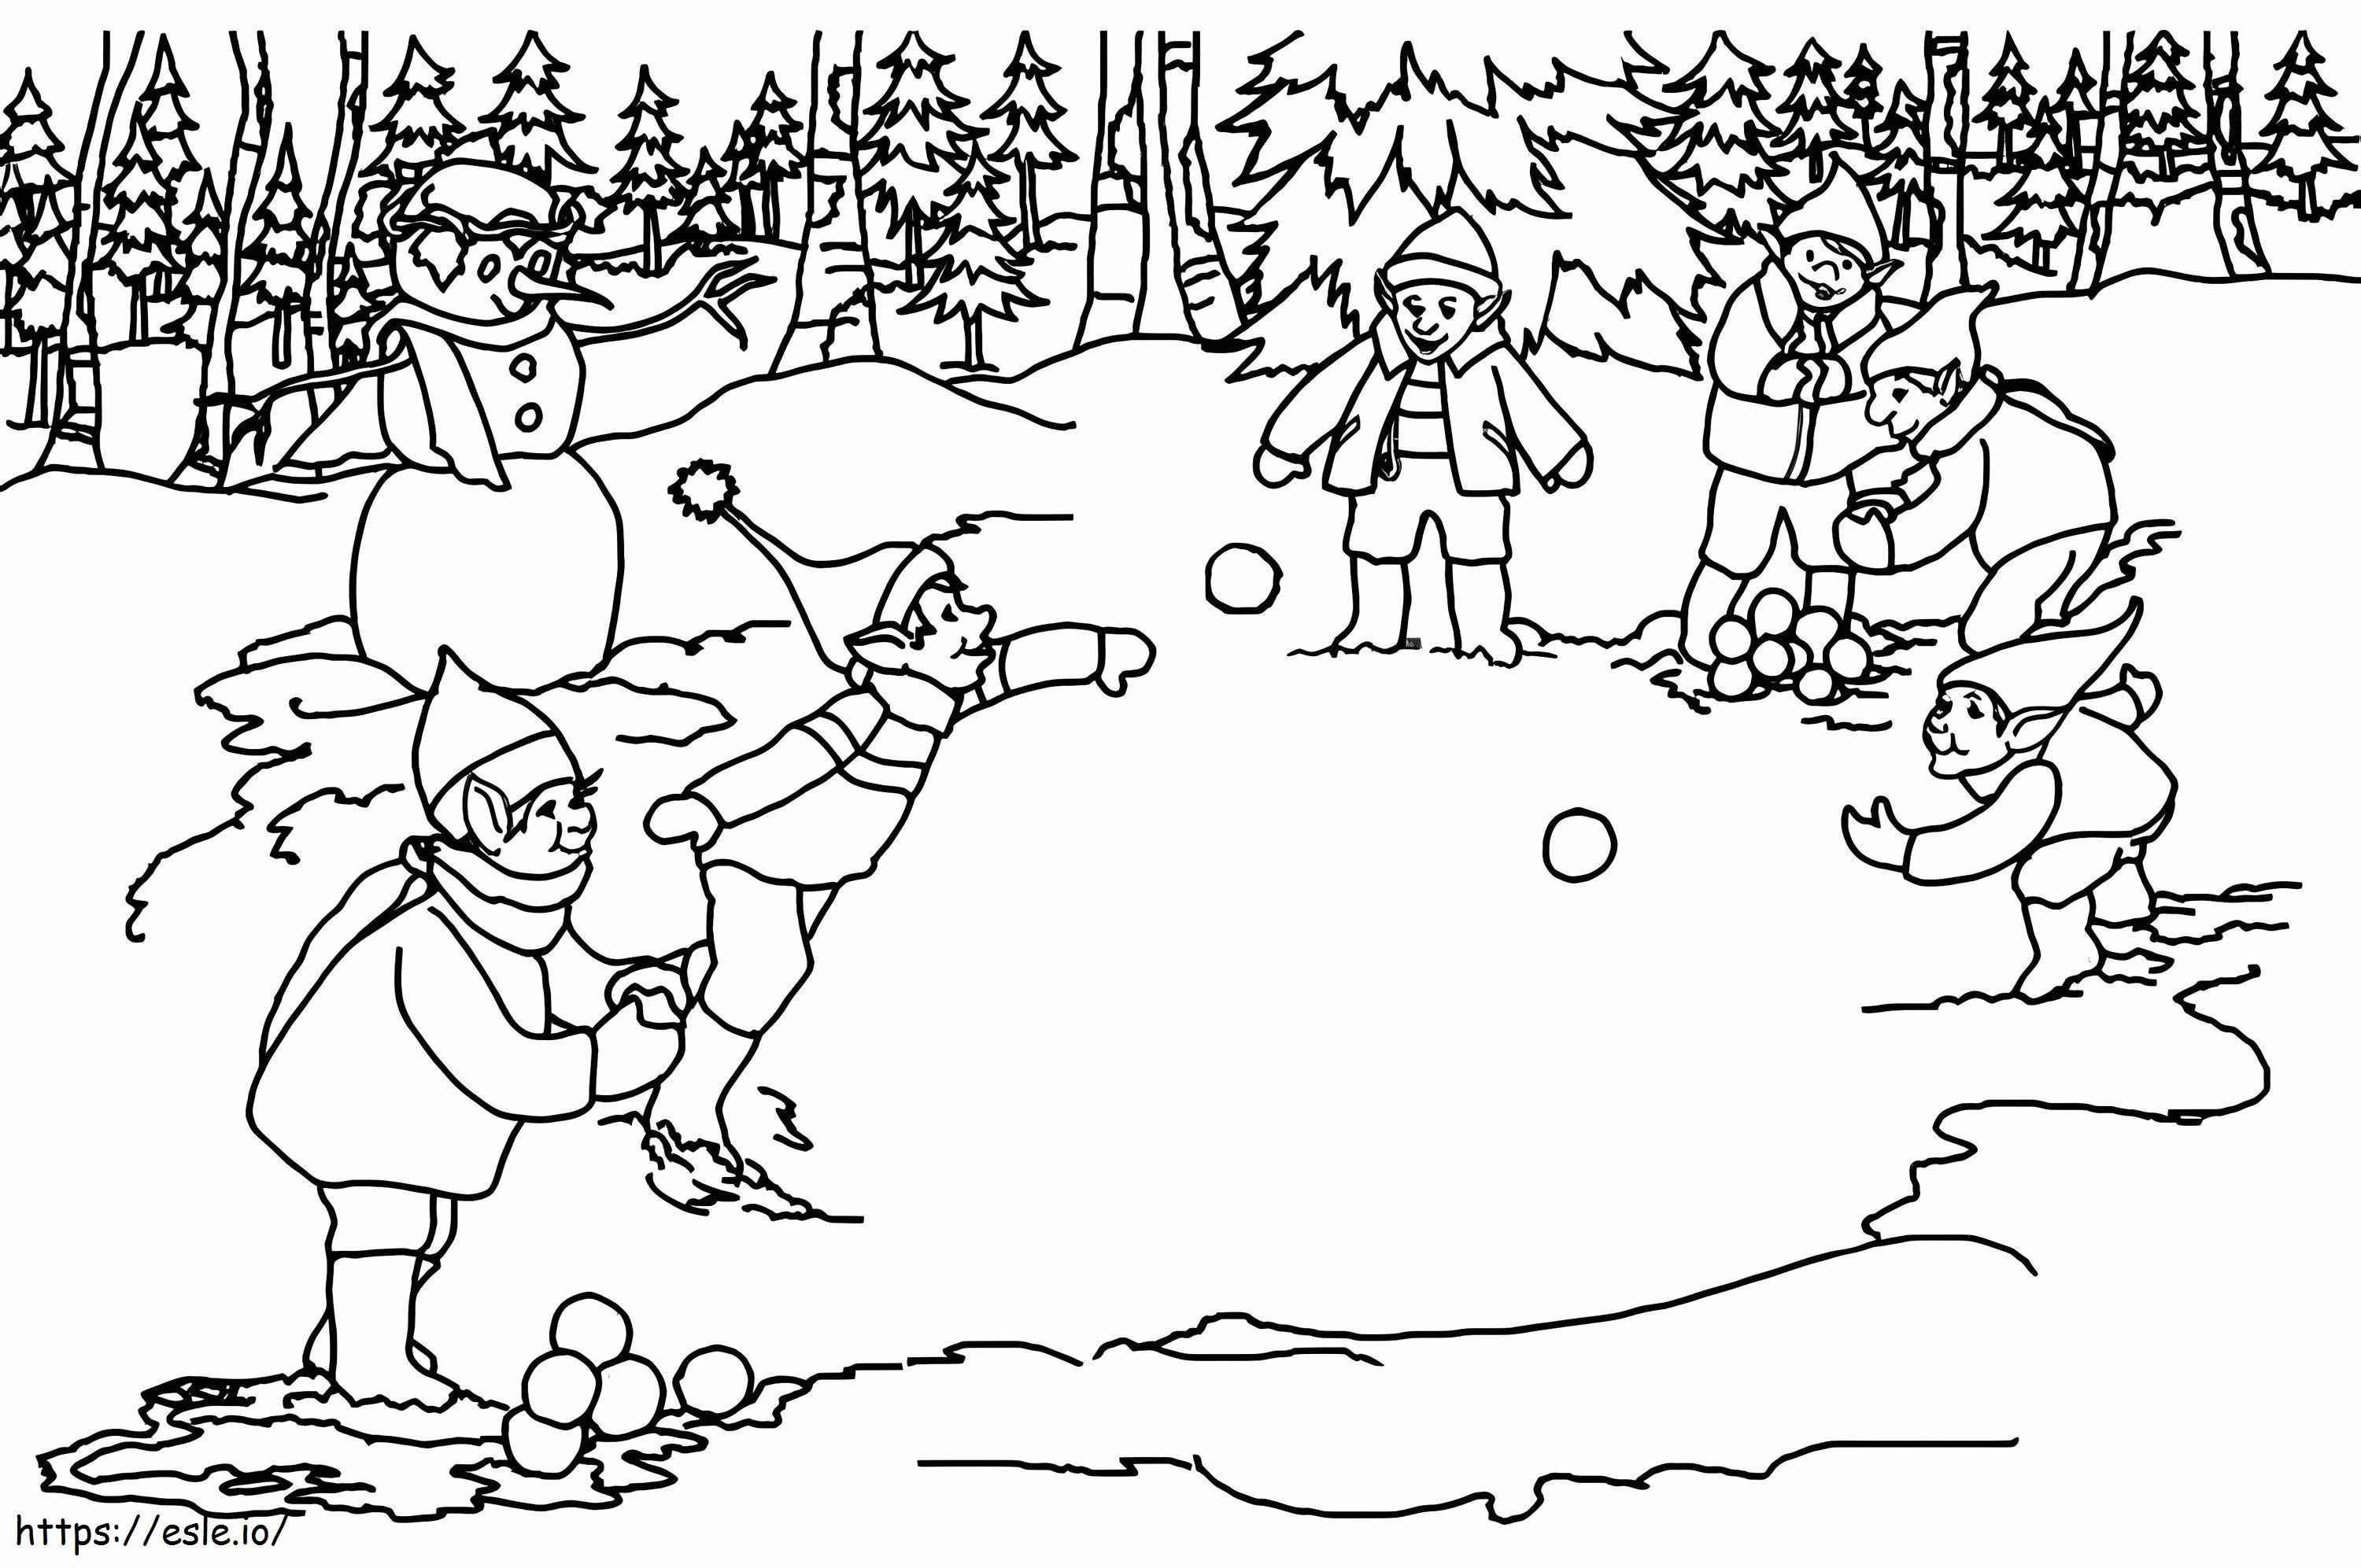 Snowball Fight With Elves coloring page